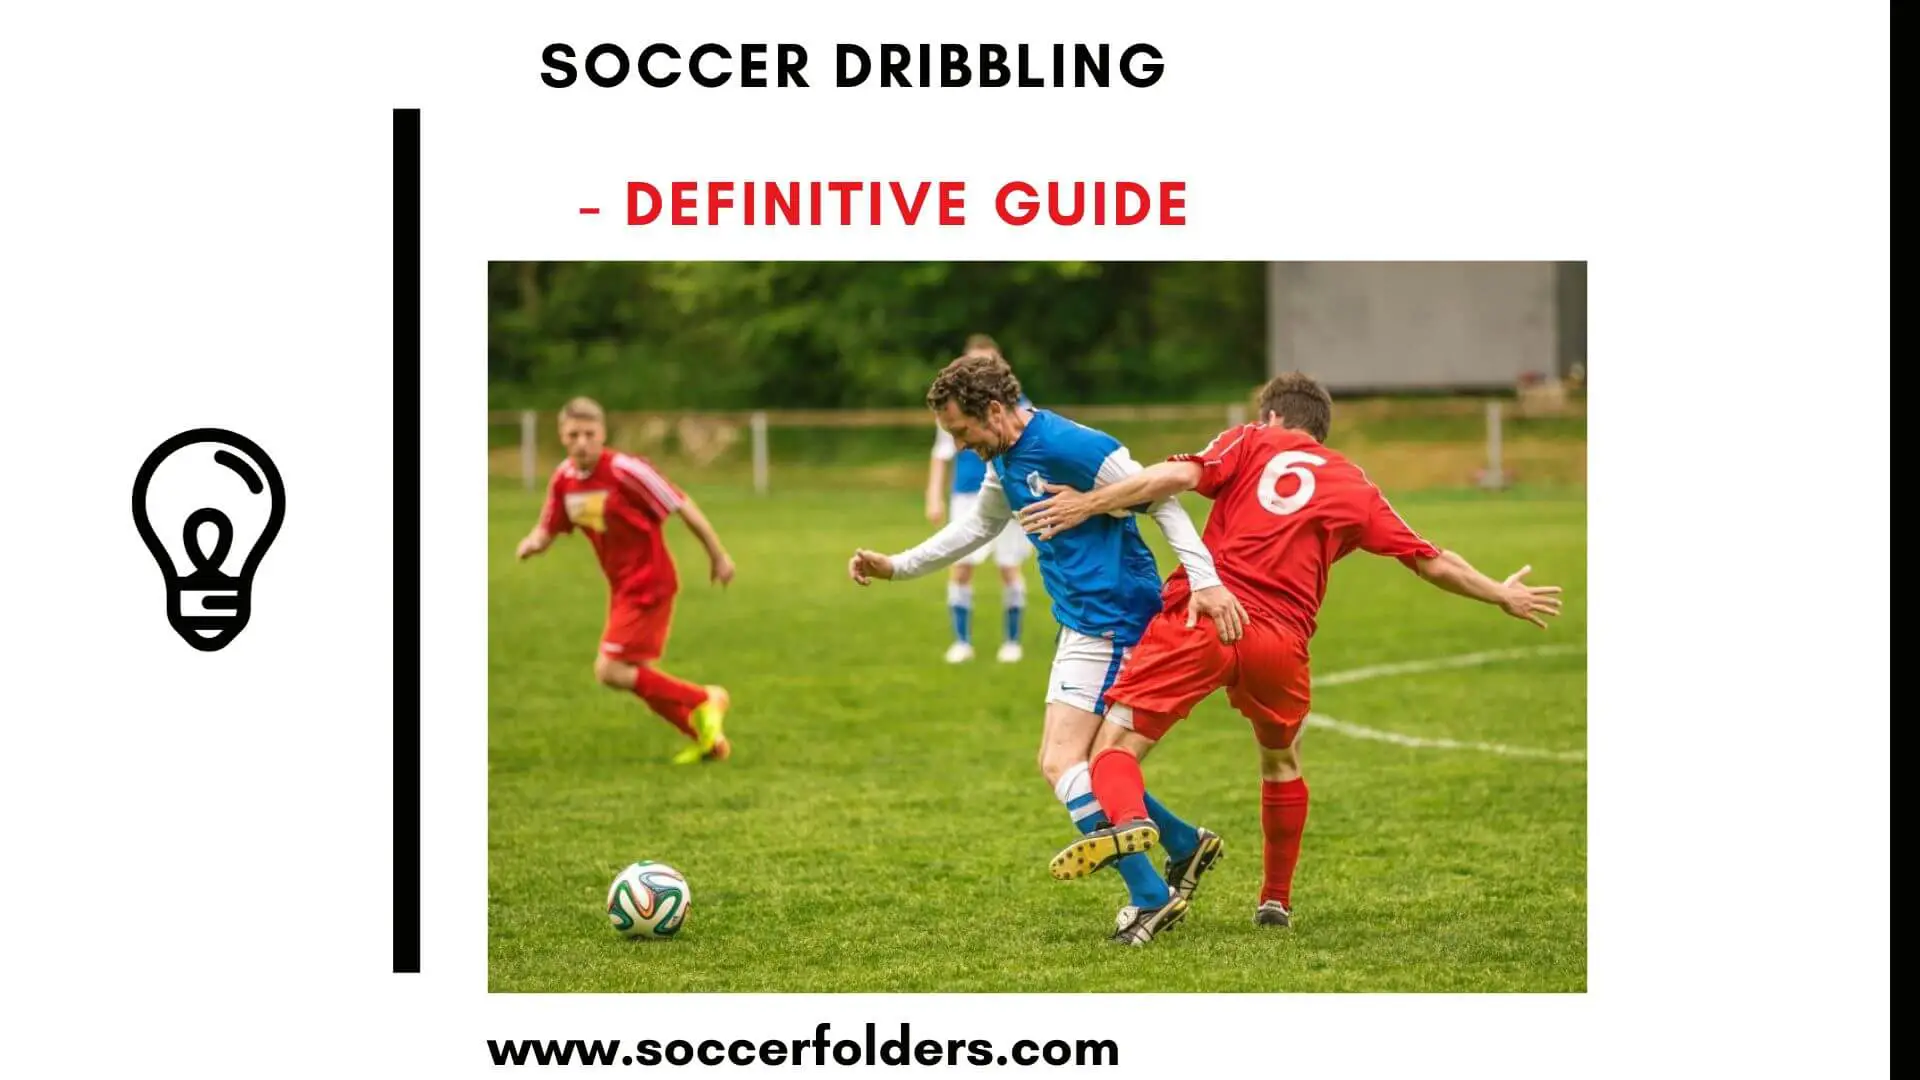 Soccer dribbling for beginners - Featured image